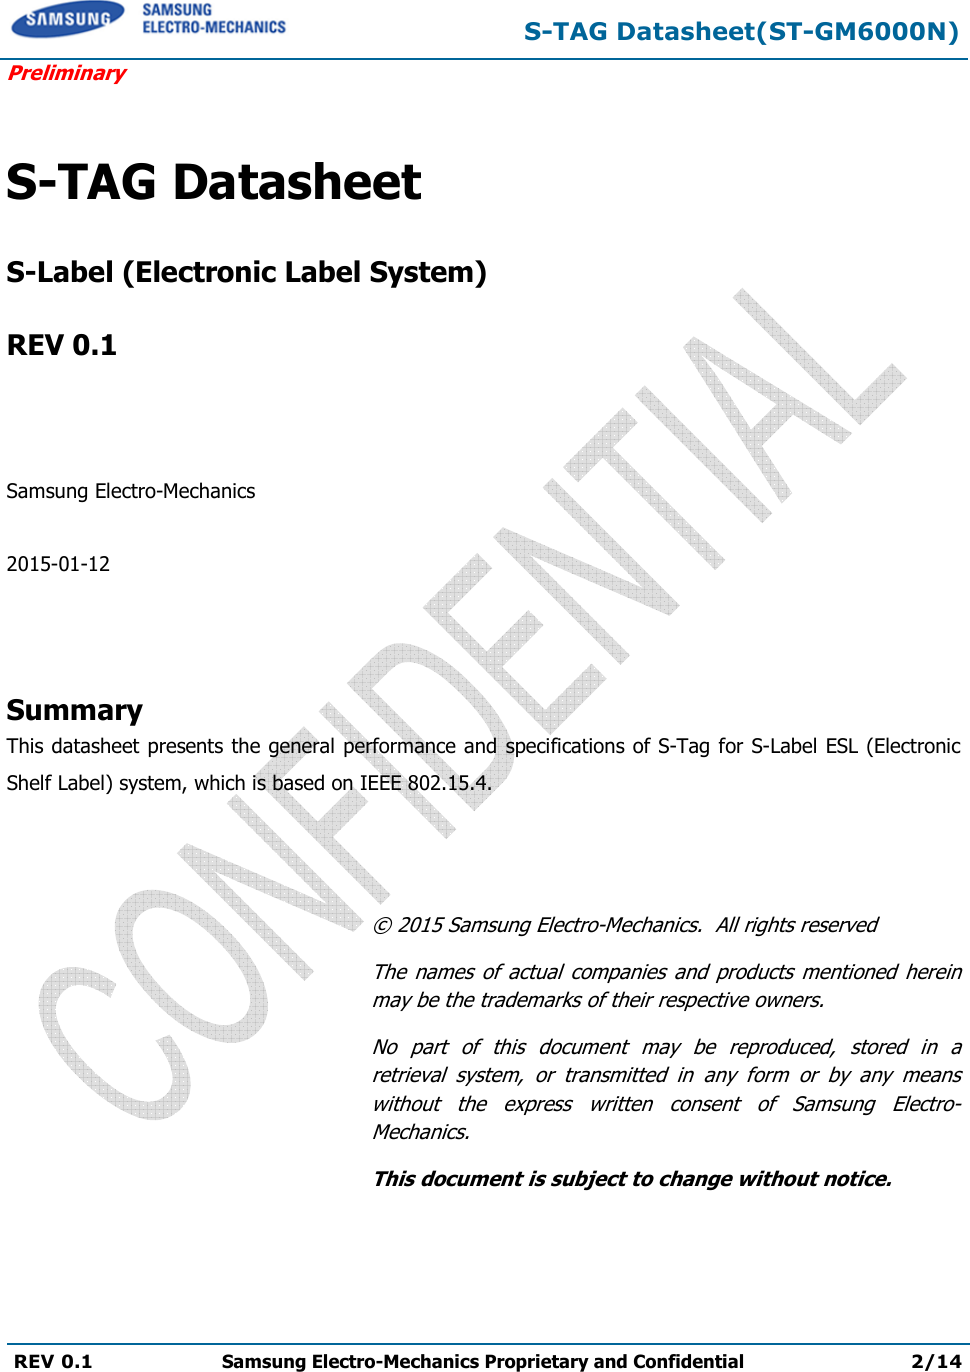  S-TAG Datasheet(ST-GM6000N) Preliminary REV 0.1  Samsung Electro-Mechanics Proprietary and Confidential 2/14    S-TAG Datasheet   S-Label (Electronic Label System)  REV 0.1    Samsung Electro-Mechanics  2015-01-12    Summary This datasheet presents the general performance and specifications of S-Tag for S-Label ESL (Electronic Shelf Label) system, which is based on IEEE 802.15.4.    © 2015 Samsung Electro-Mechanics.  All rights reserved The  names  of  actual  companies  and  products  mentioned herein may be the trademarks of their respective owners. No  part  of  this  document  may  be  reproduced,  stored  in  a retrieval  system,  or  transmitted  in  any  form  or  by  any  means without  the  express  written  consent  of  Samsung  Electro-Mechanics. This document is subject to change without notice. 